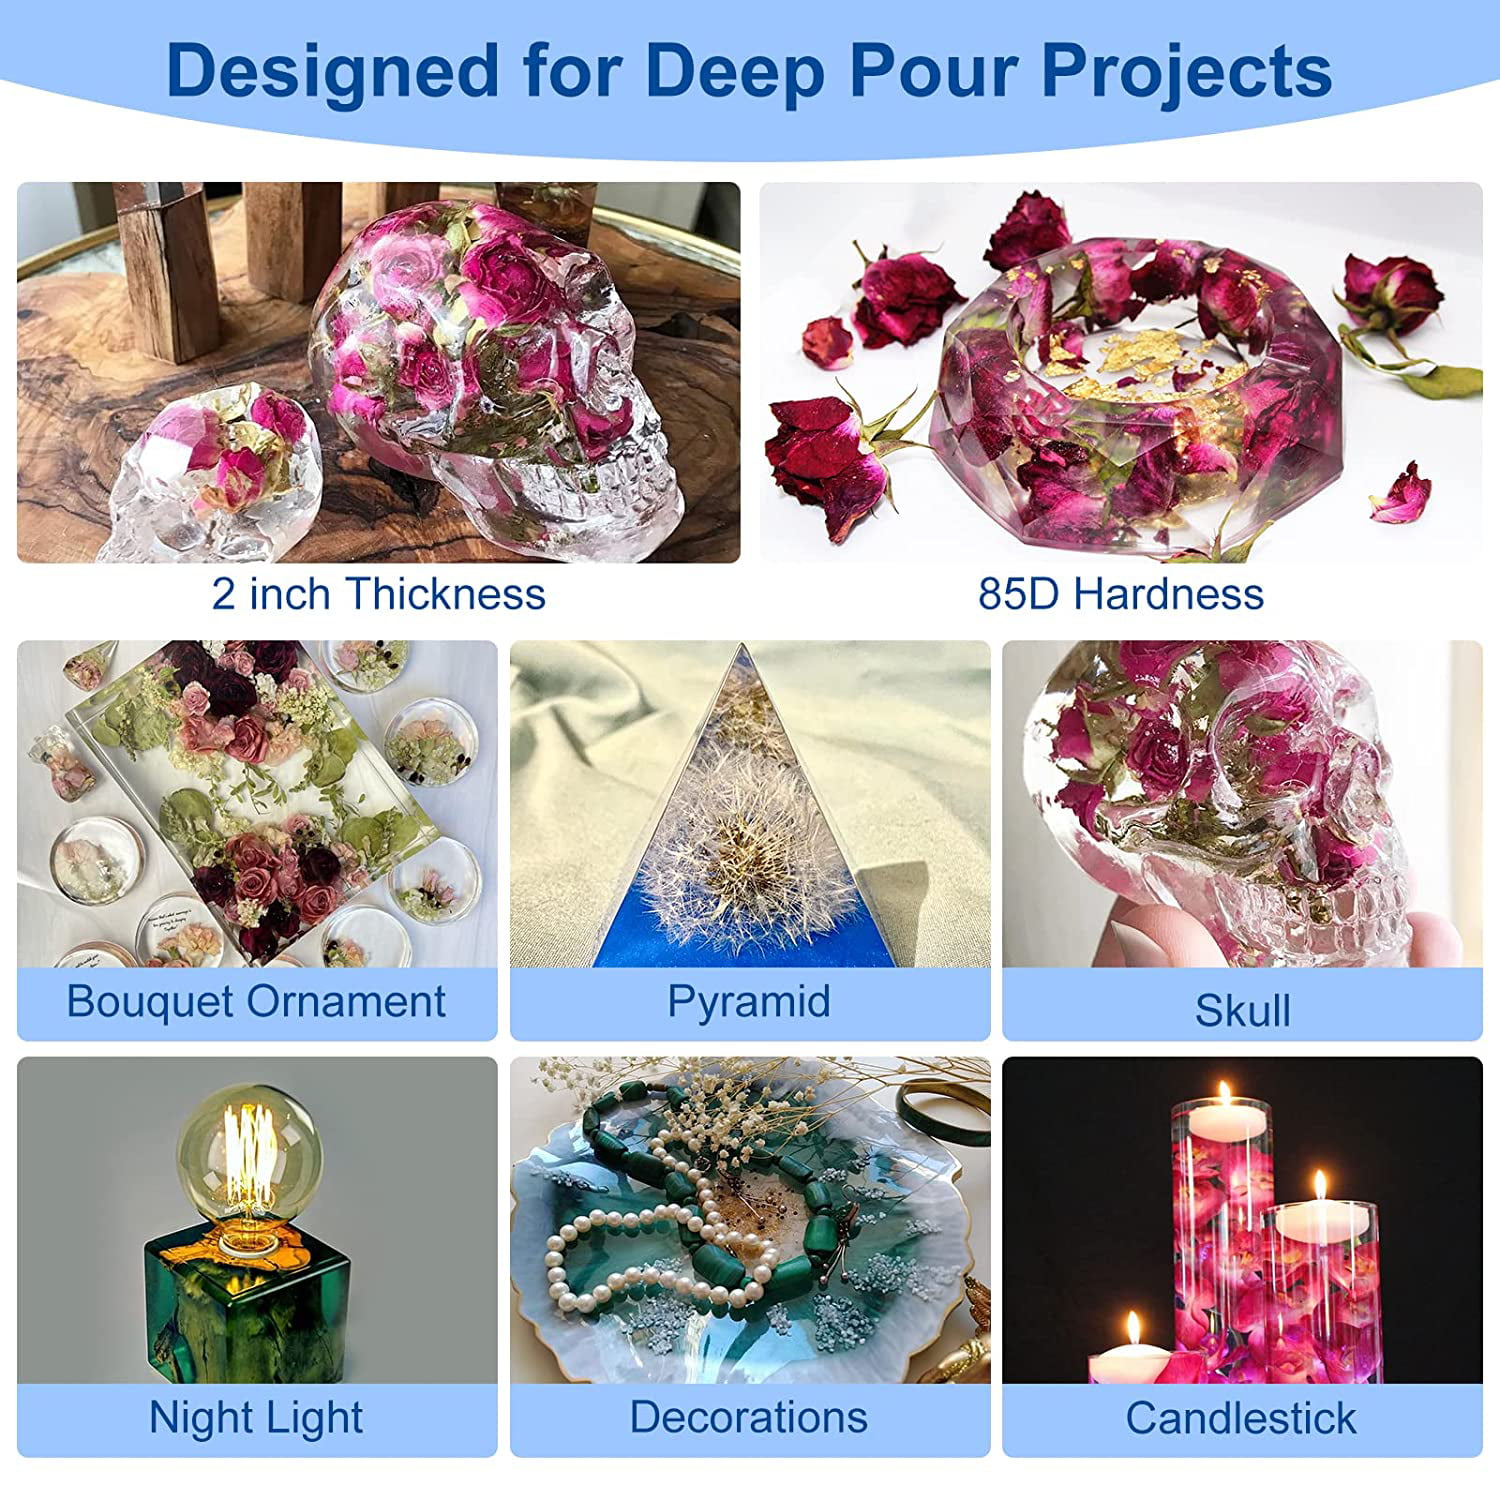 Teexpert Deep Pour Epoxy Resin, Epoxy Resin Kit for 2-4 Pour Depths, Crystal Clear & High Gloss, Bubble-free Casting Resin for Flower Preservation, R